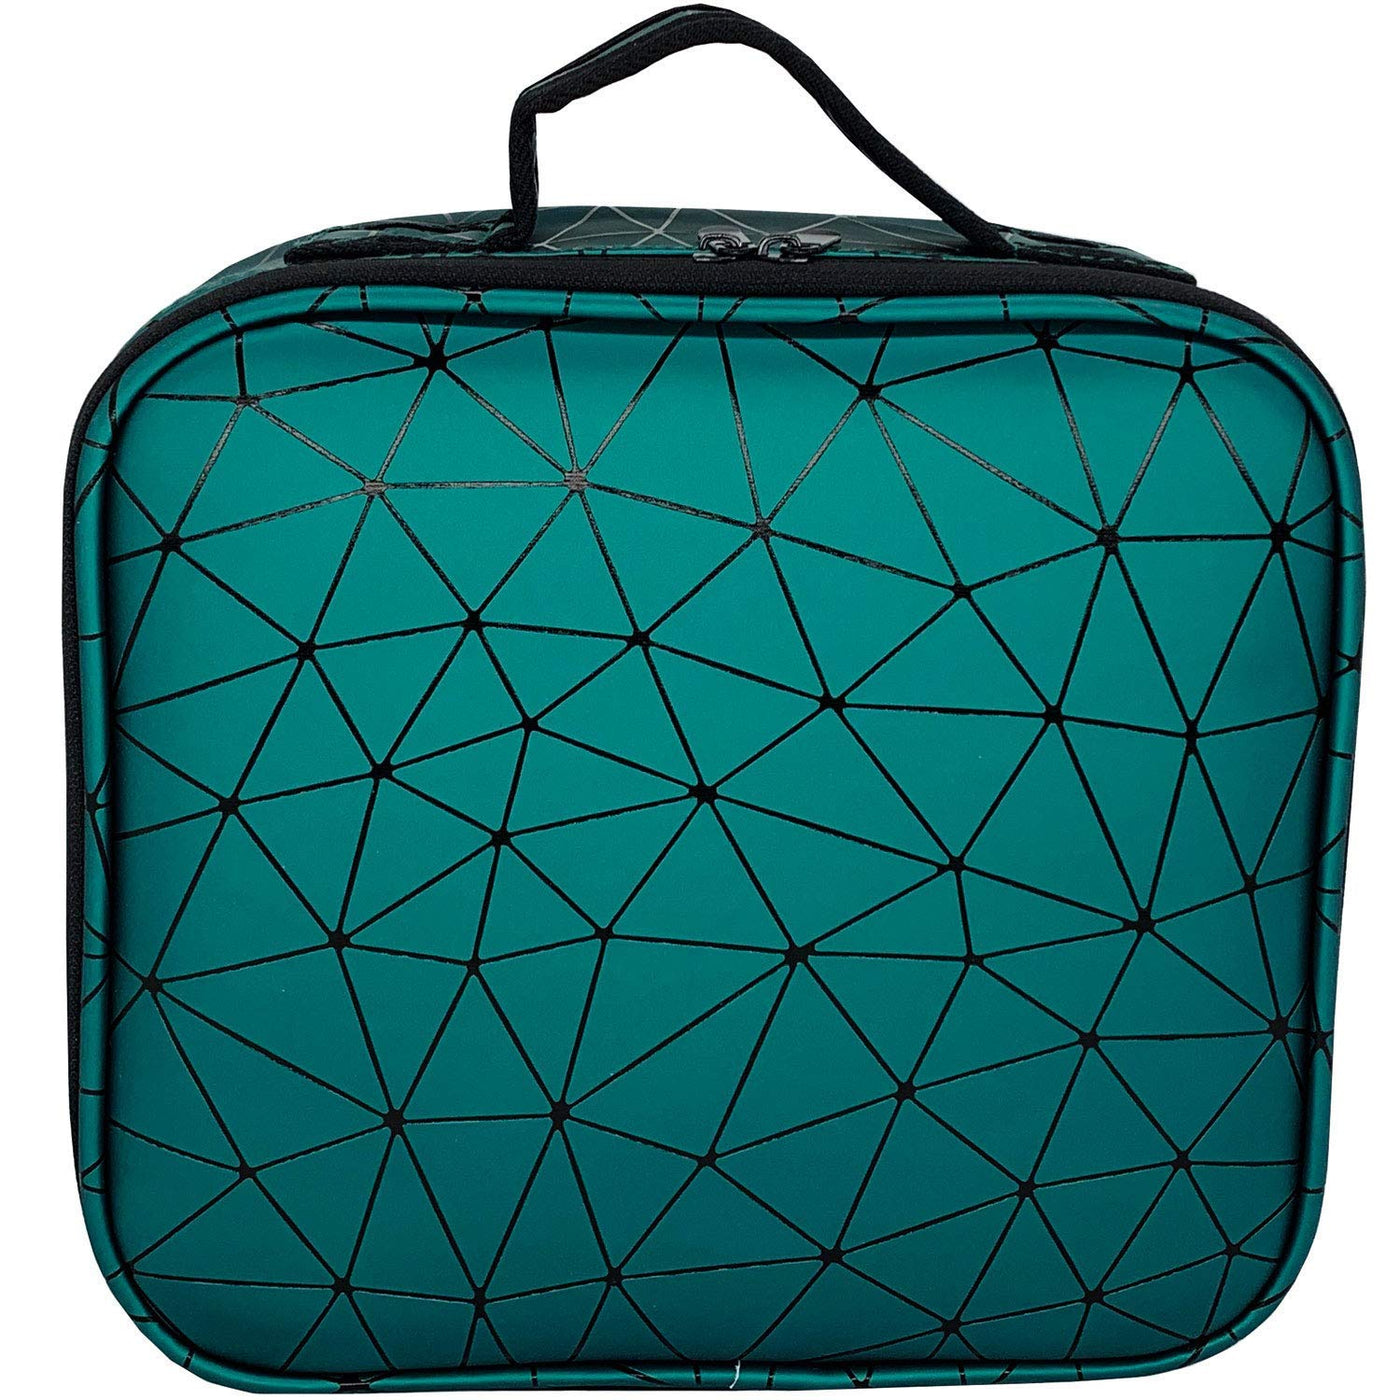 Cosmetic Storage Case with Adjustable Compartment (Green Diamond)